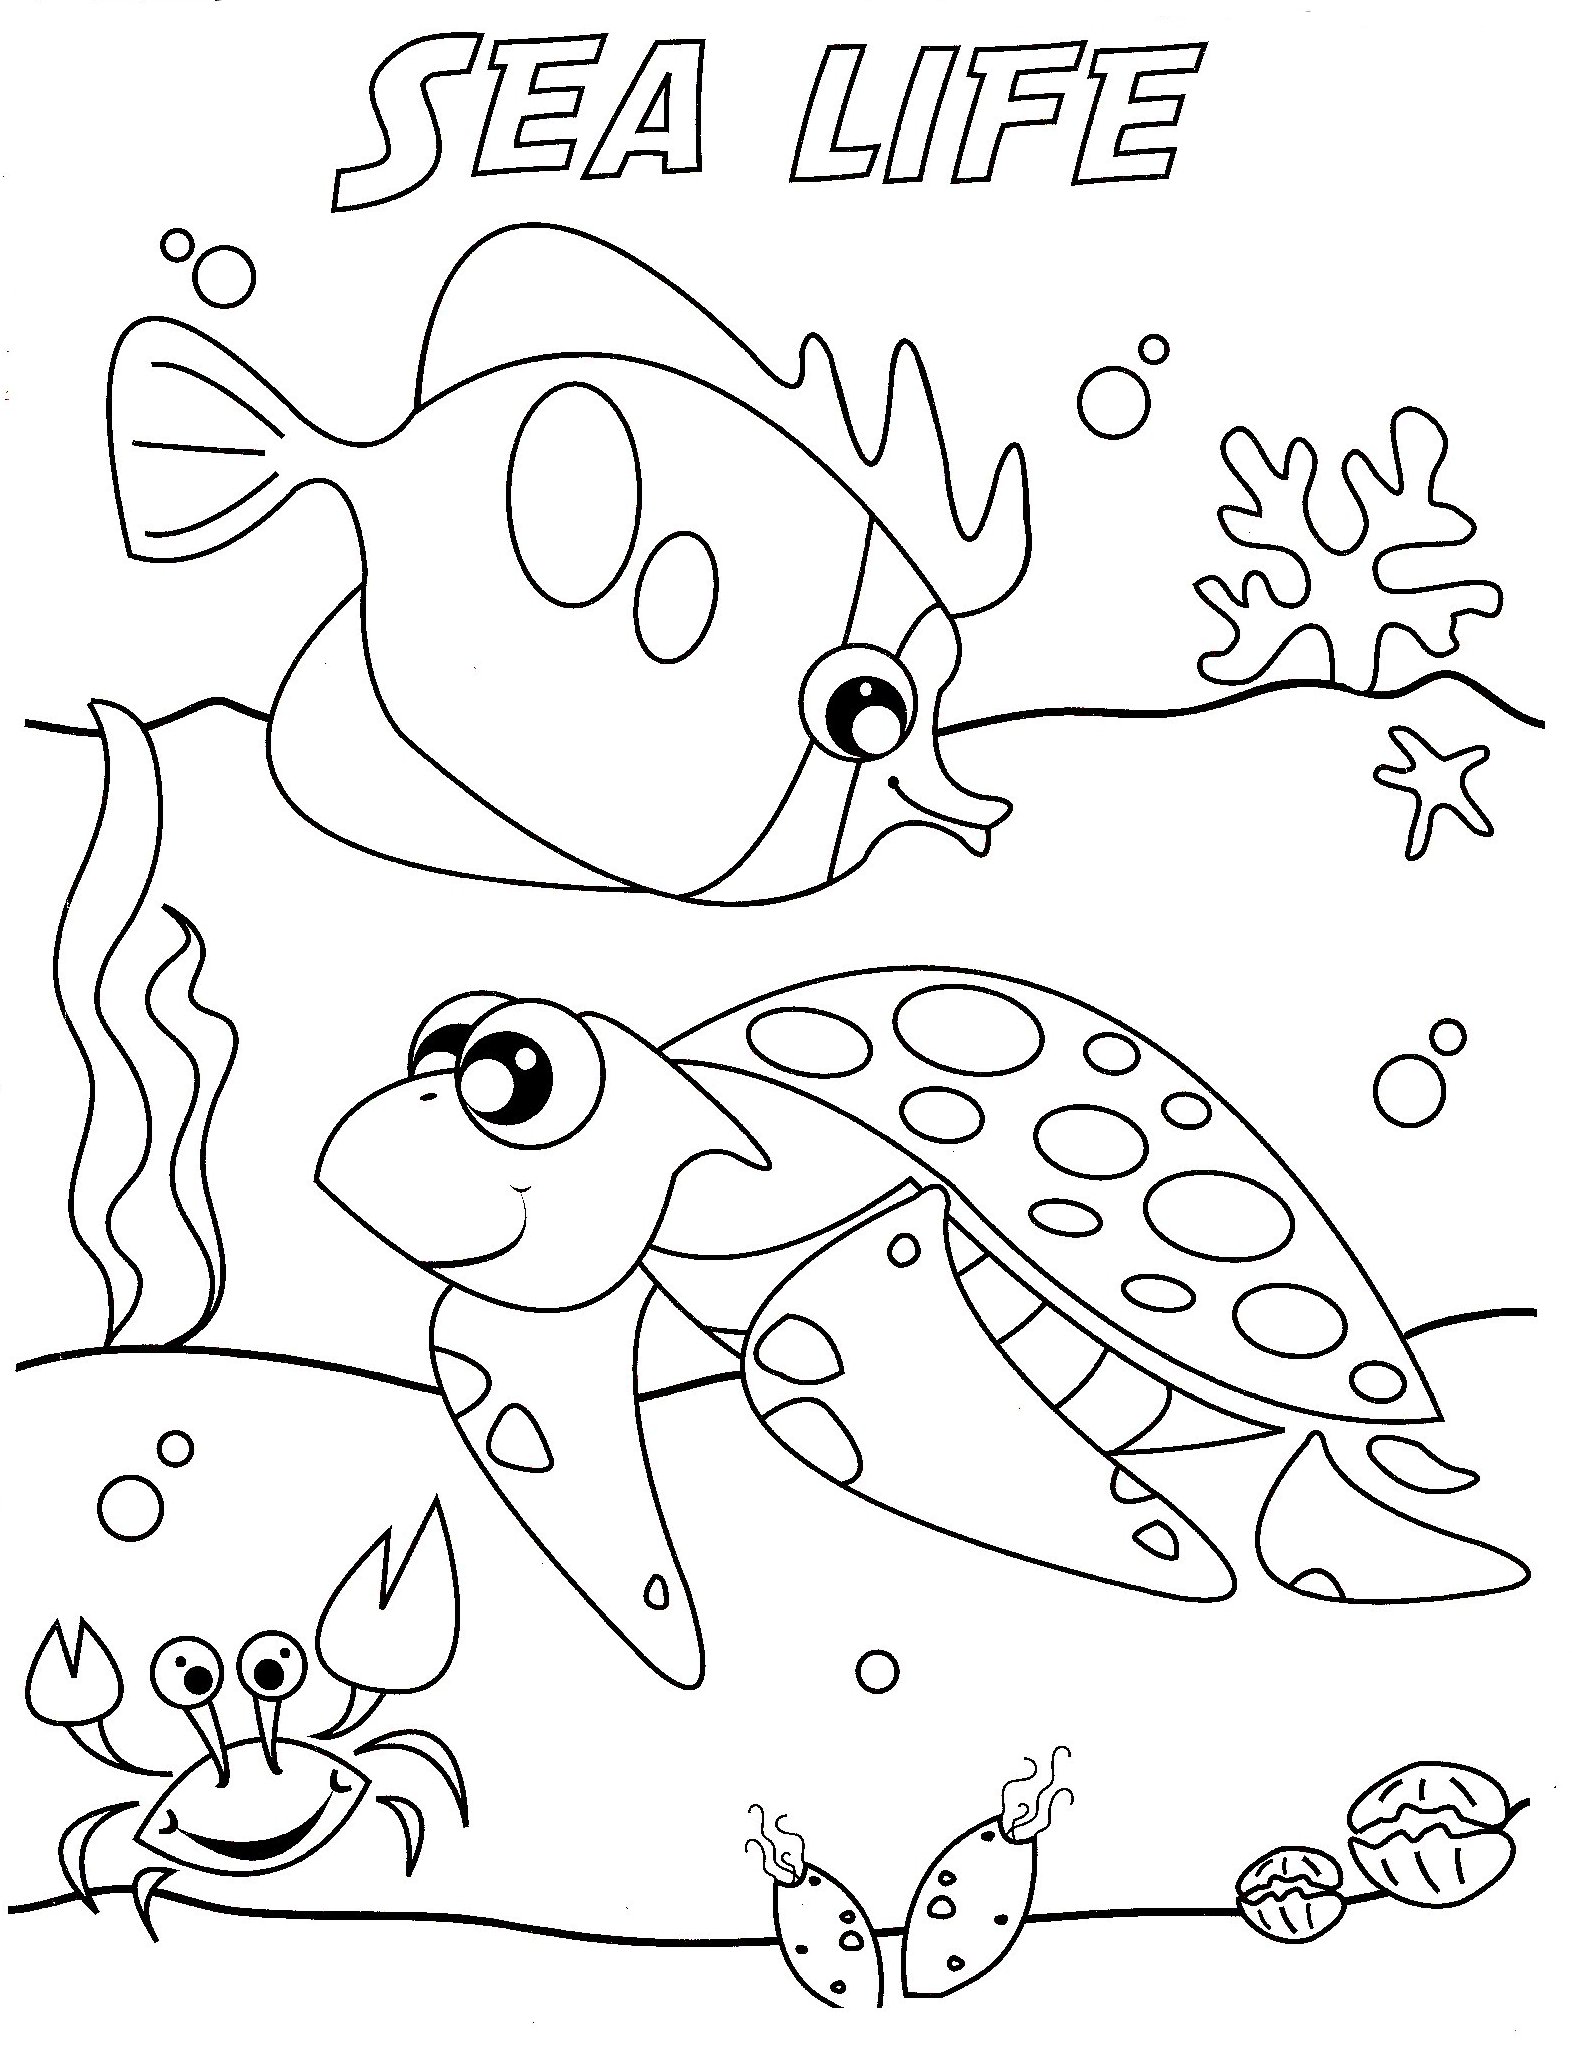 sea-life-coloring-pages-free-under-the-sea-coloring-pages-to-print-for-kids-ocean-coloring